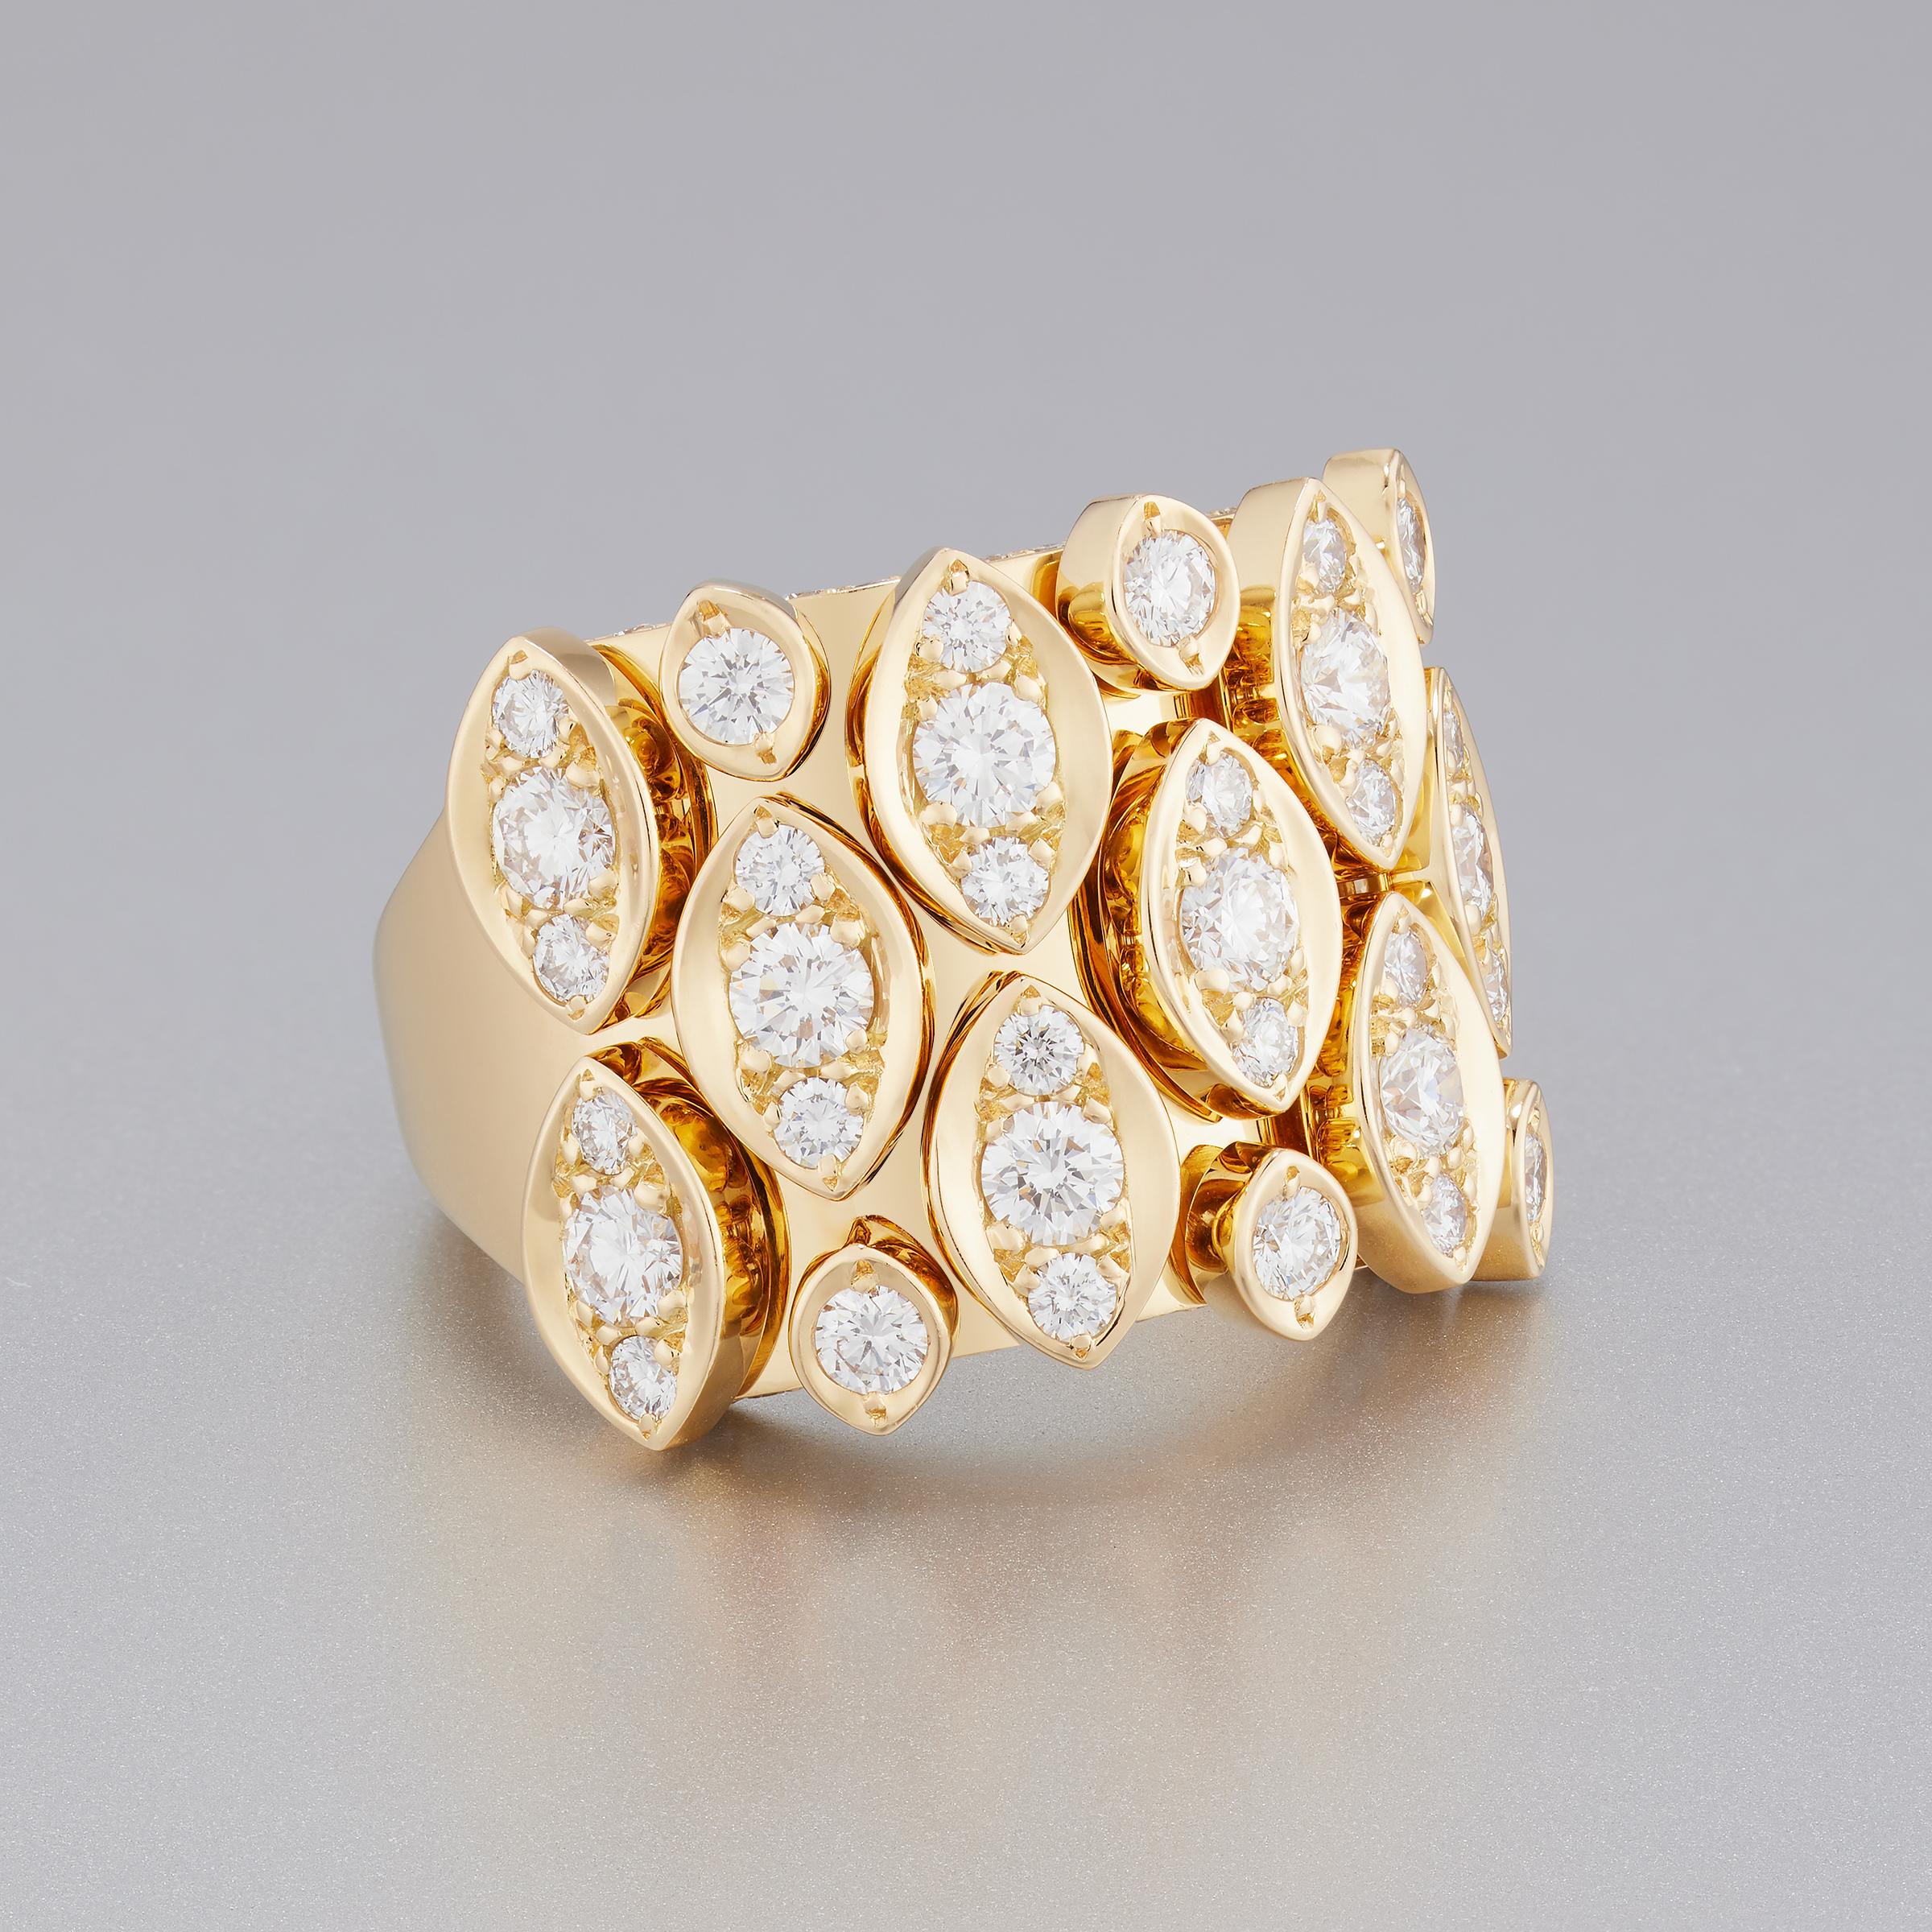 Spectacular Cartier diamond ring from Diadea collection features approximately 1.6 carats of finest quality diamonds (E-F color and VVS clarity) set in opulent 18 karat yellow gold setting. The round brilliant diamonds offer incredible sparkle and